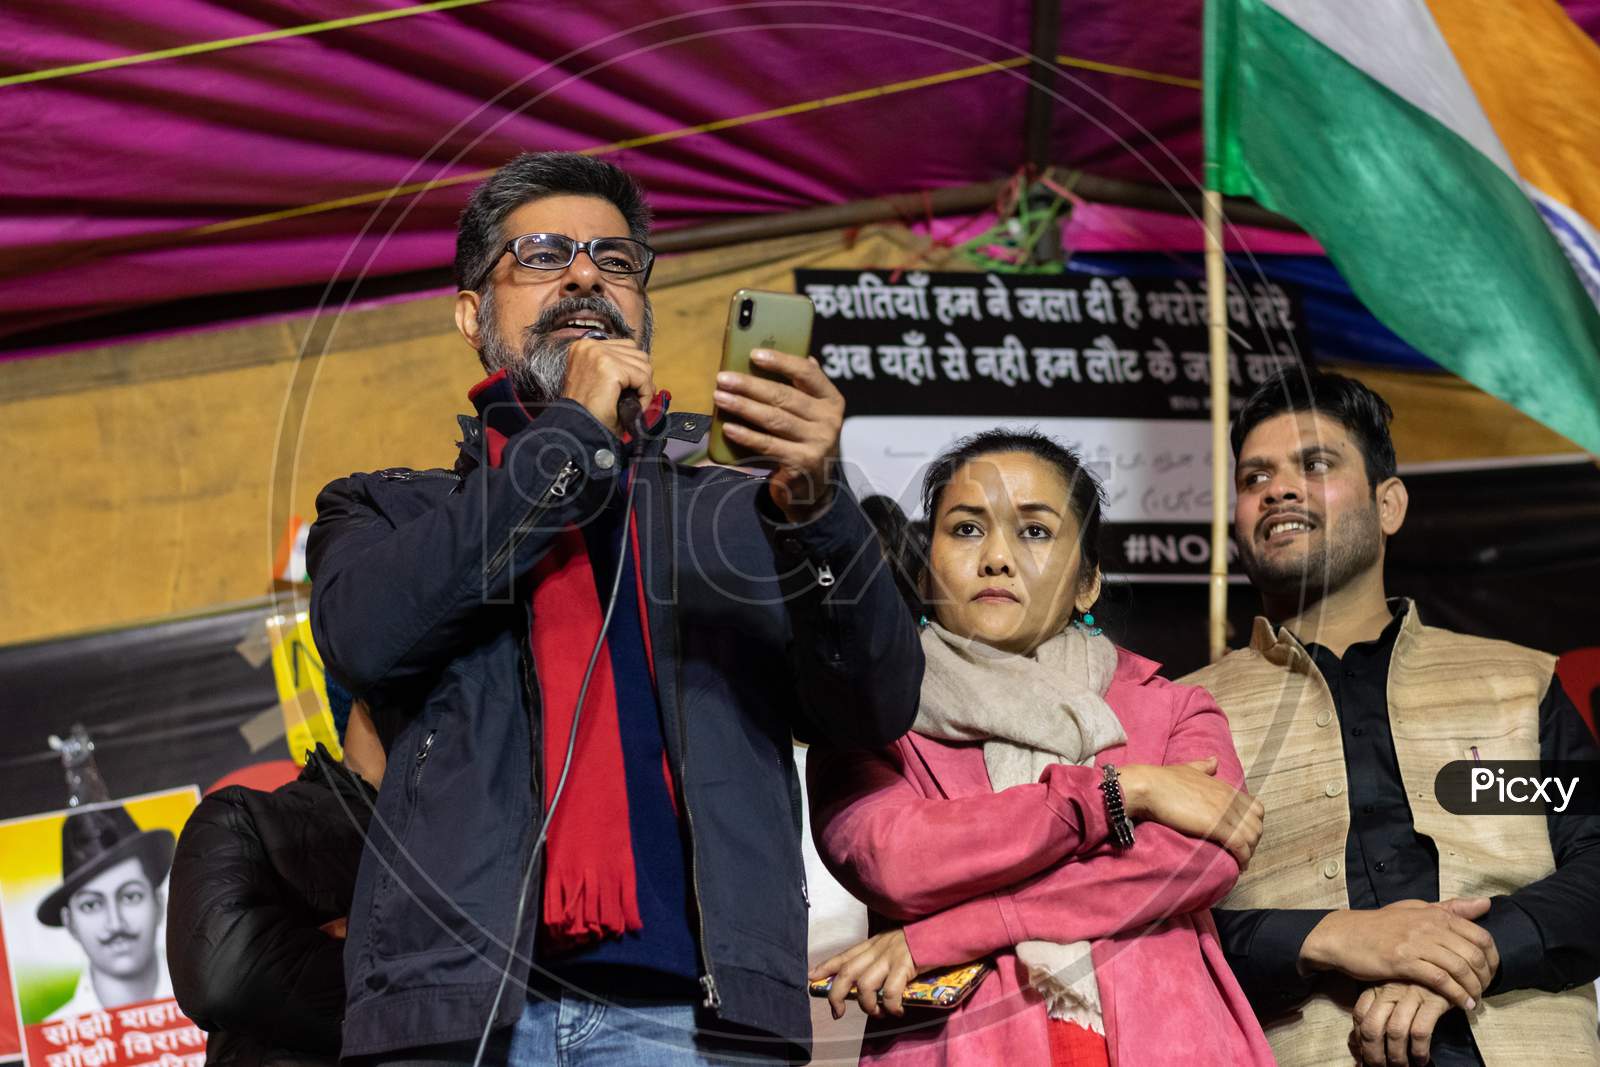 Actor Sushant Singh and his wife Molina Singh speaking on stage at shaheen Bagh during protest against Citizenship Amendment Act CAA, National Register Of Citizens NRC and National Population Register NPR